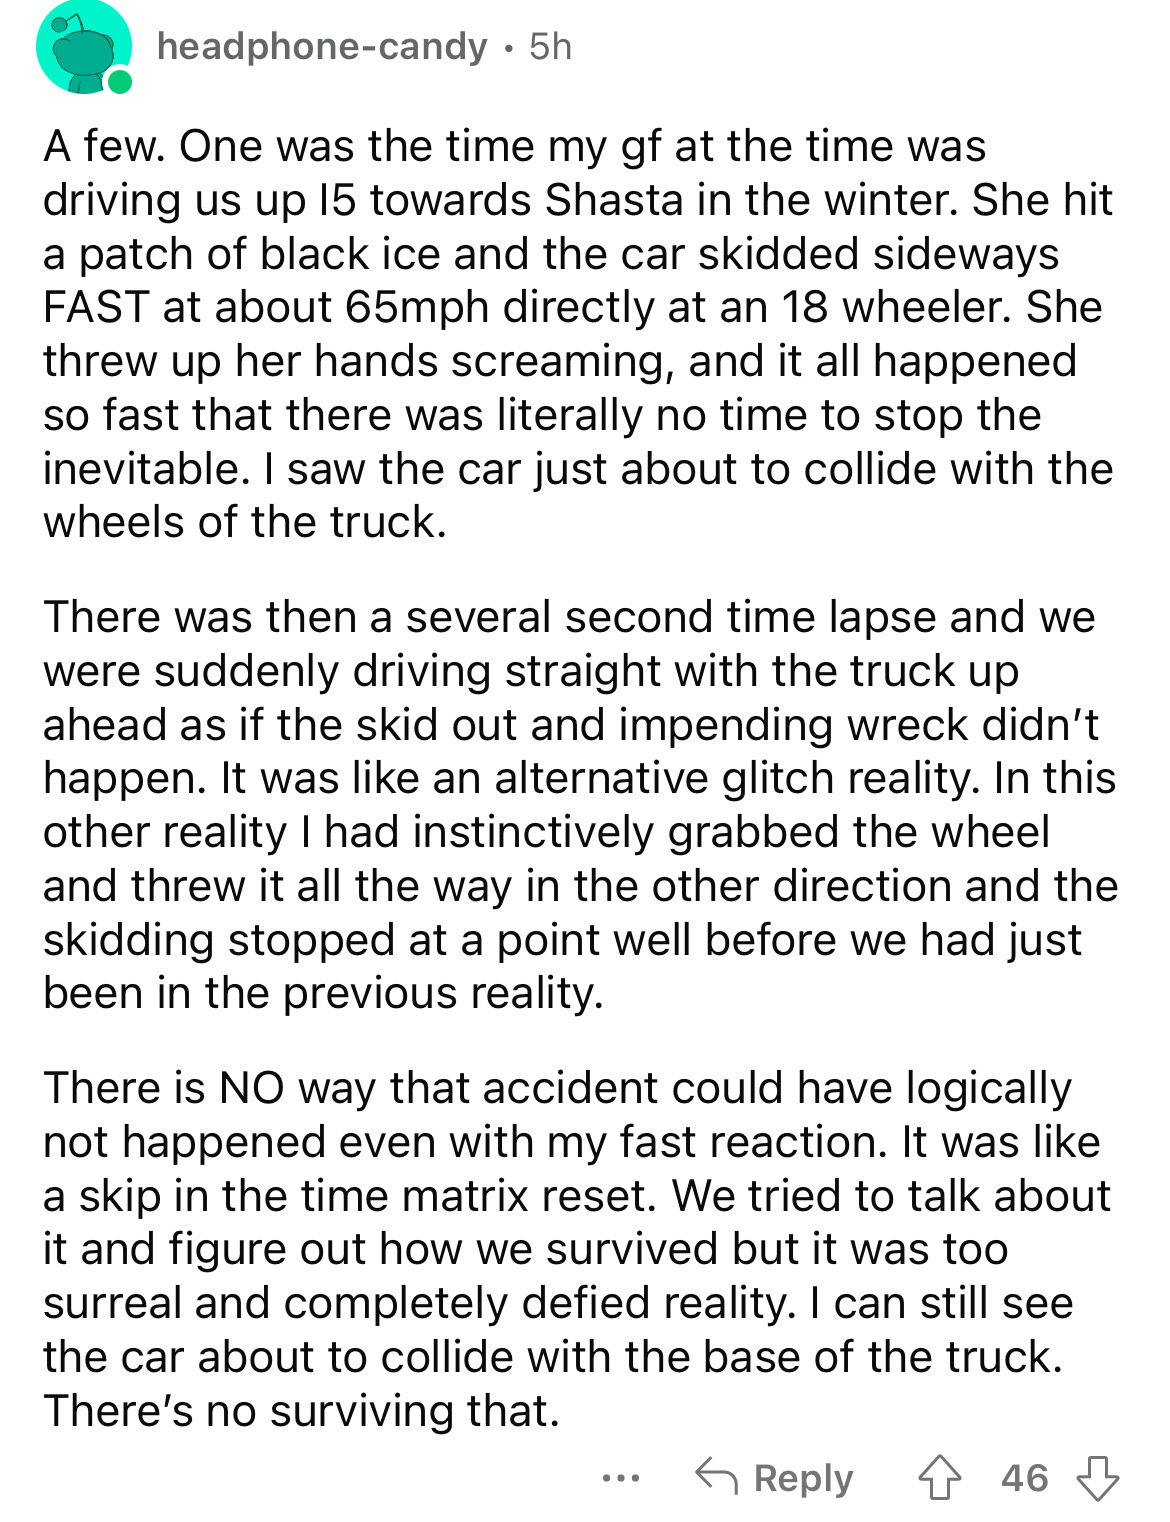 document - headphonecandy. 5h A few. One was the time my gf at the time was driving us up 15 towards Shasta in the winter. She hit a patch of black ice and the car skidded sideways Fast at about 65mph directly at an 18 wheeler. She threw up her hands scre